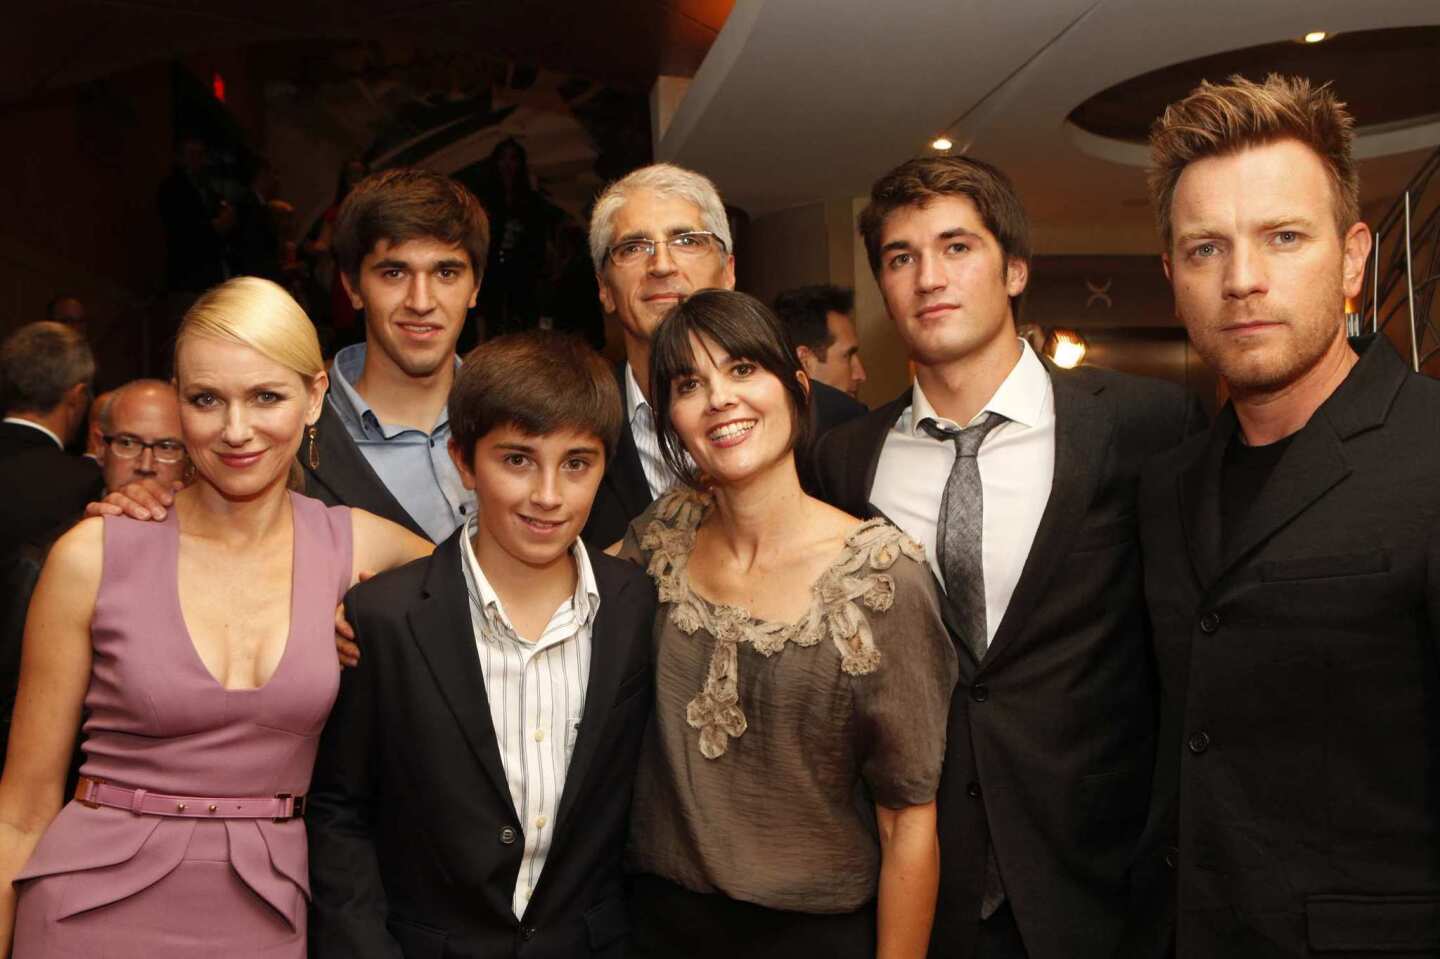 Naomi Watts, far left, and Ewan McGregor, far right, with members of the Belon family who survived the 2004 Indian Ocean tsunami that claimed nearly 300,000 lives. The Belons' story is featured in the new movie "The Impossible."